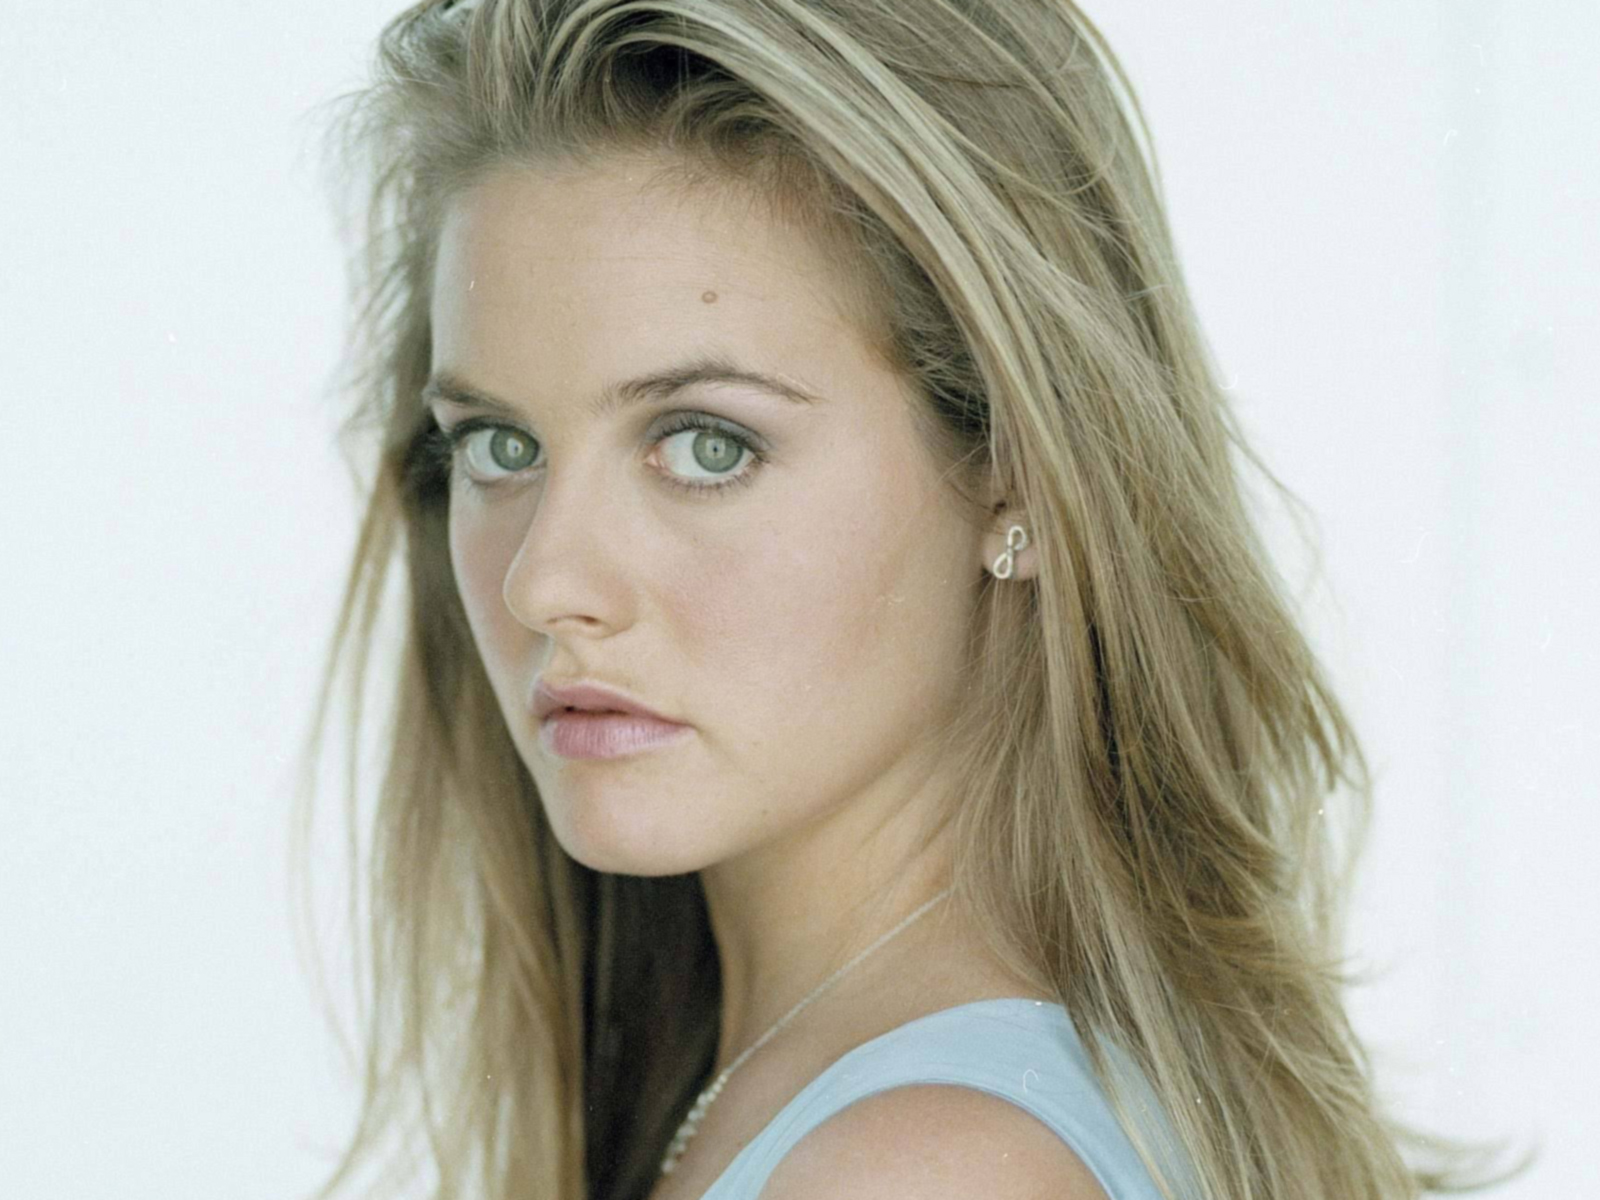 ... Wallpapers Alicia Silverstone Wallpapers